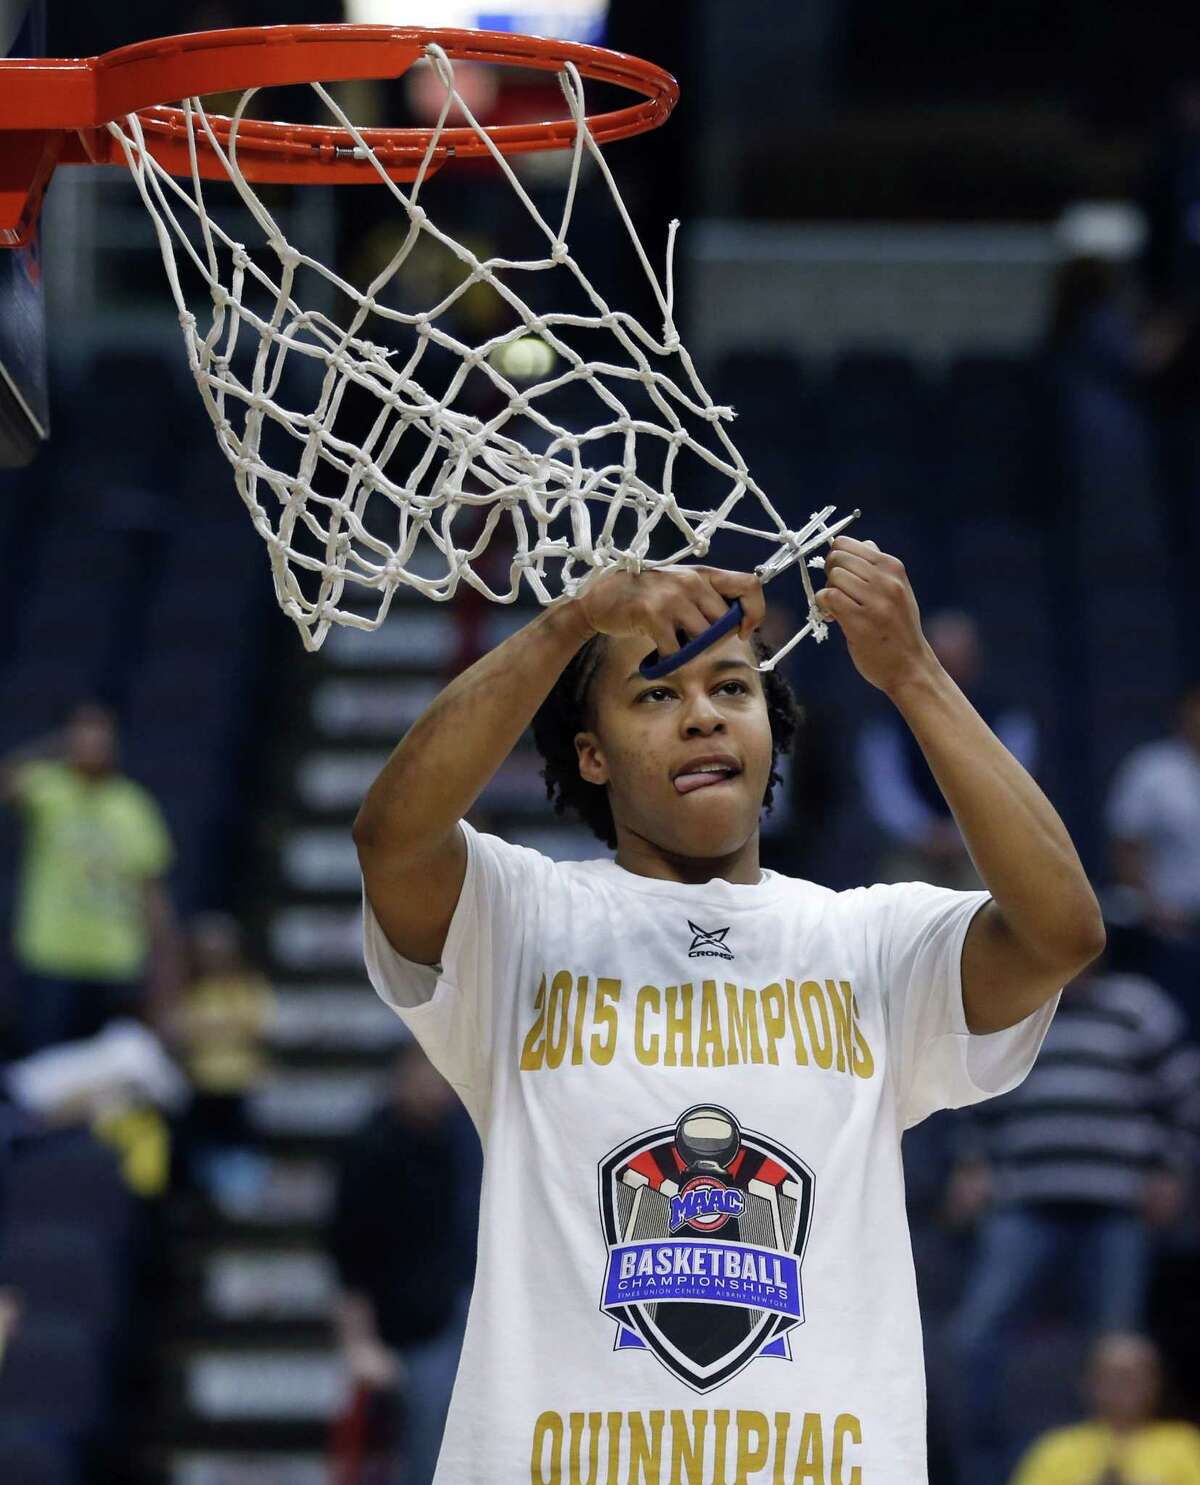 Quinnipiac’s Jasmine Martin cuts the net after the Bobcats’ 72-61 win over Marist in the MAAC tournament championship game on Monday in Albany, N.Y.